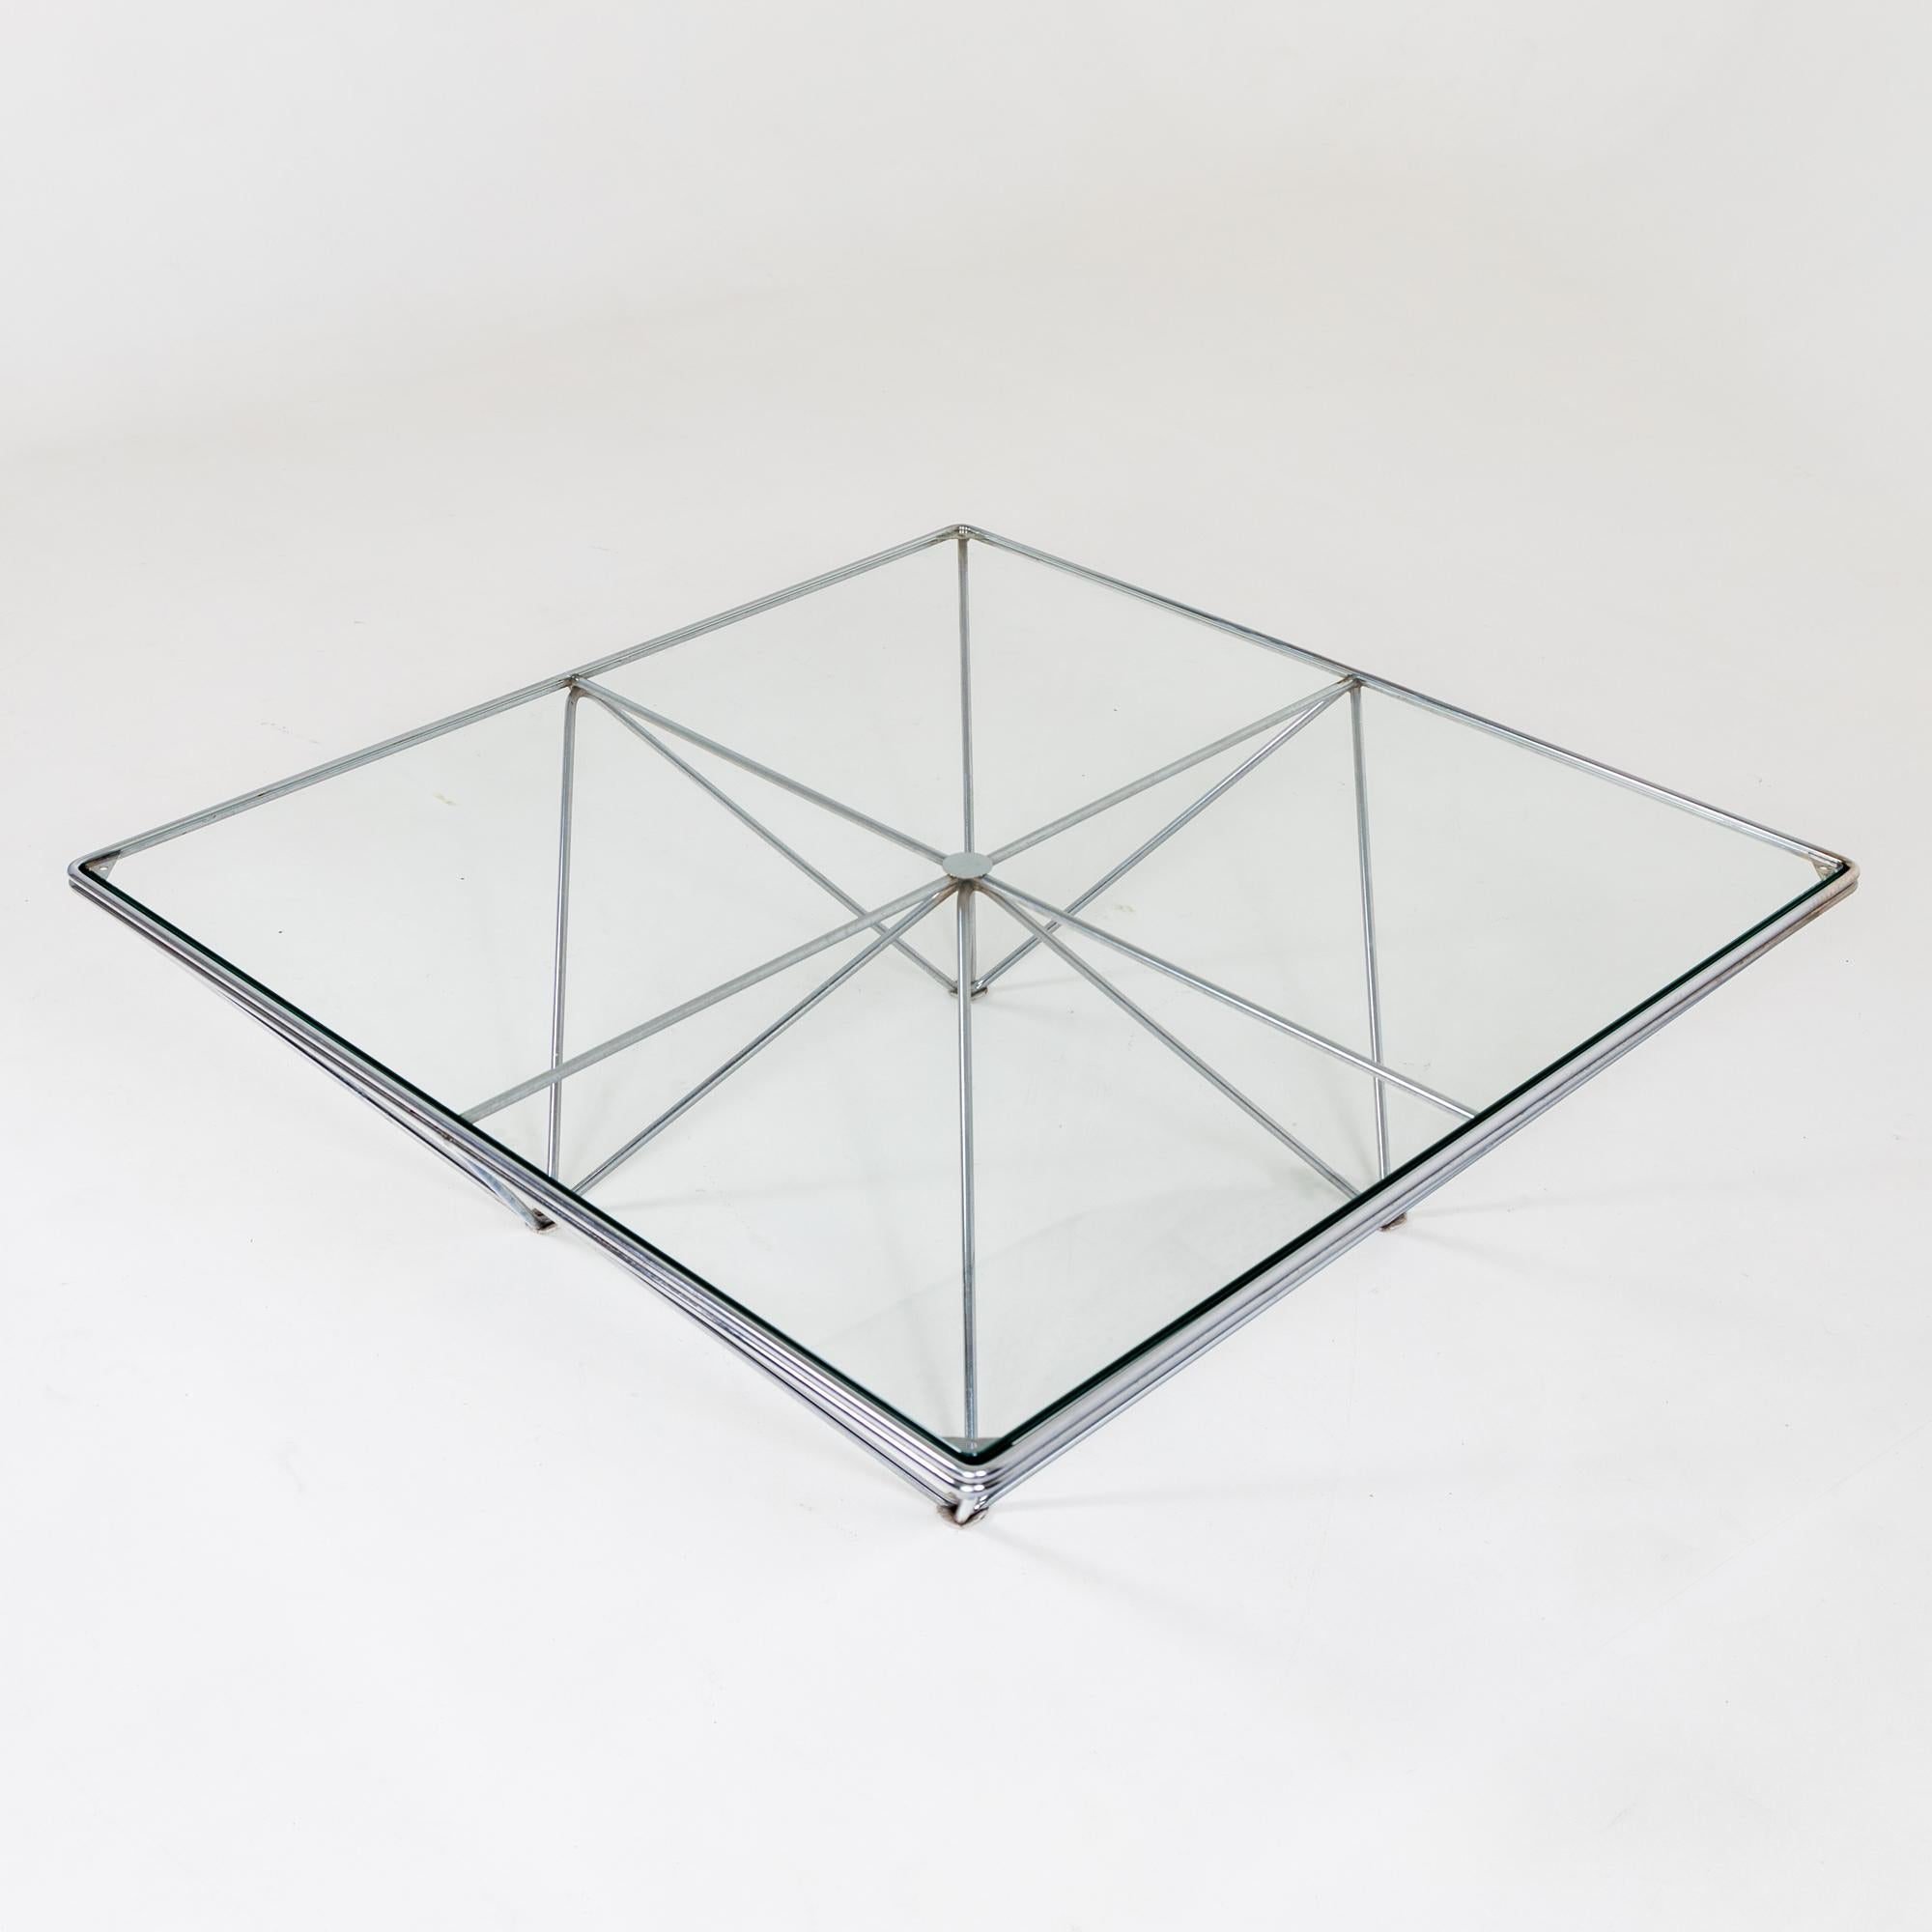 Square coffee table, model Alanda, with glass top and chromed metal frame. Attributed to Paolo Piva for B&B Italia.